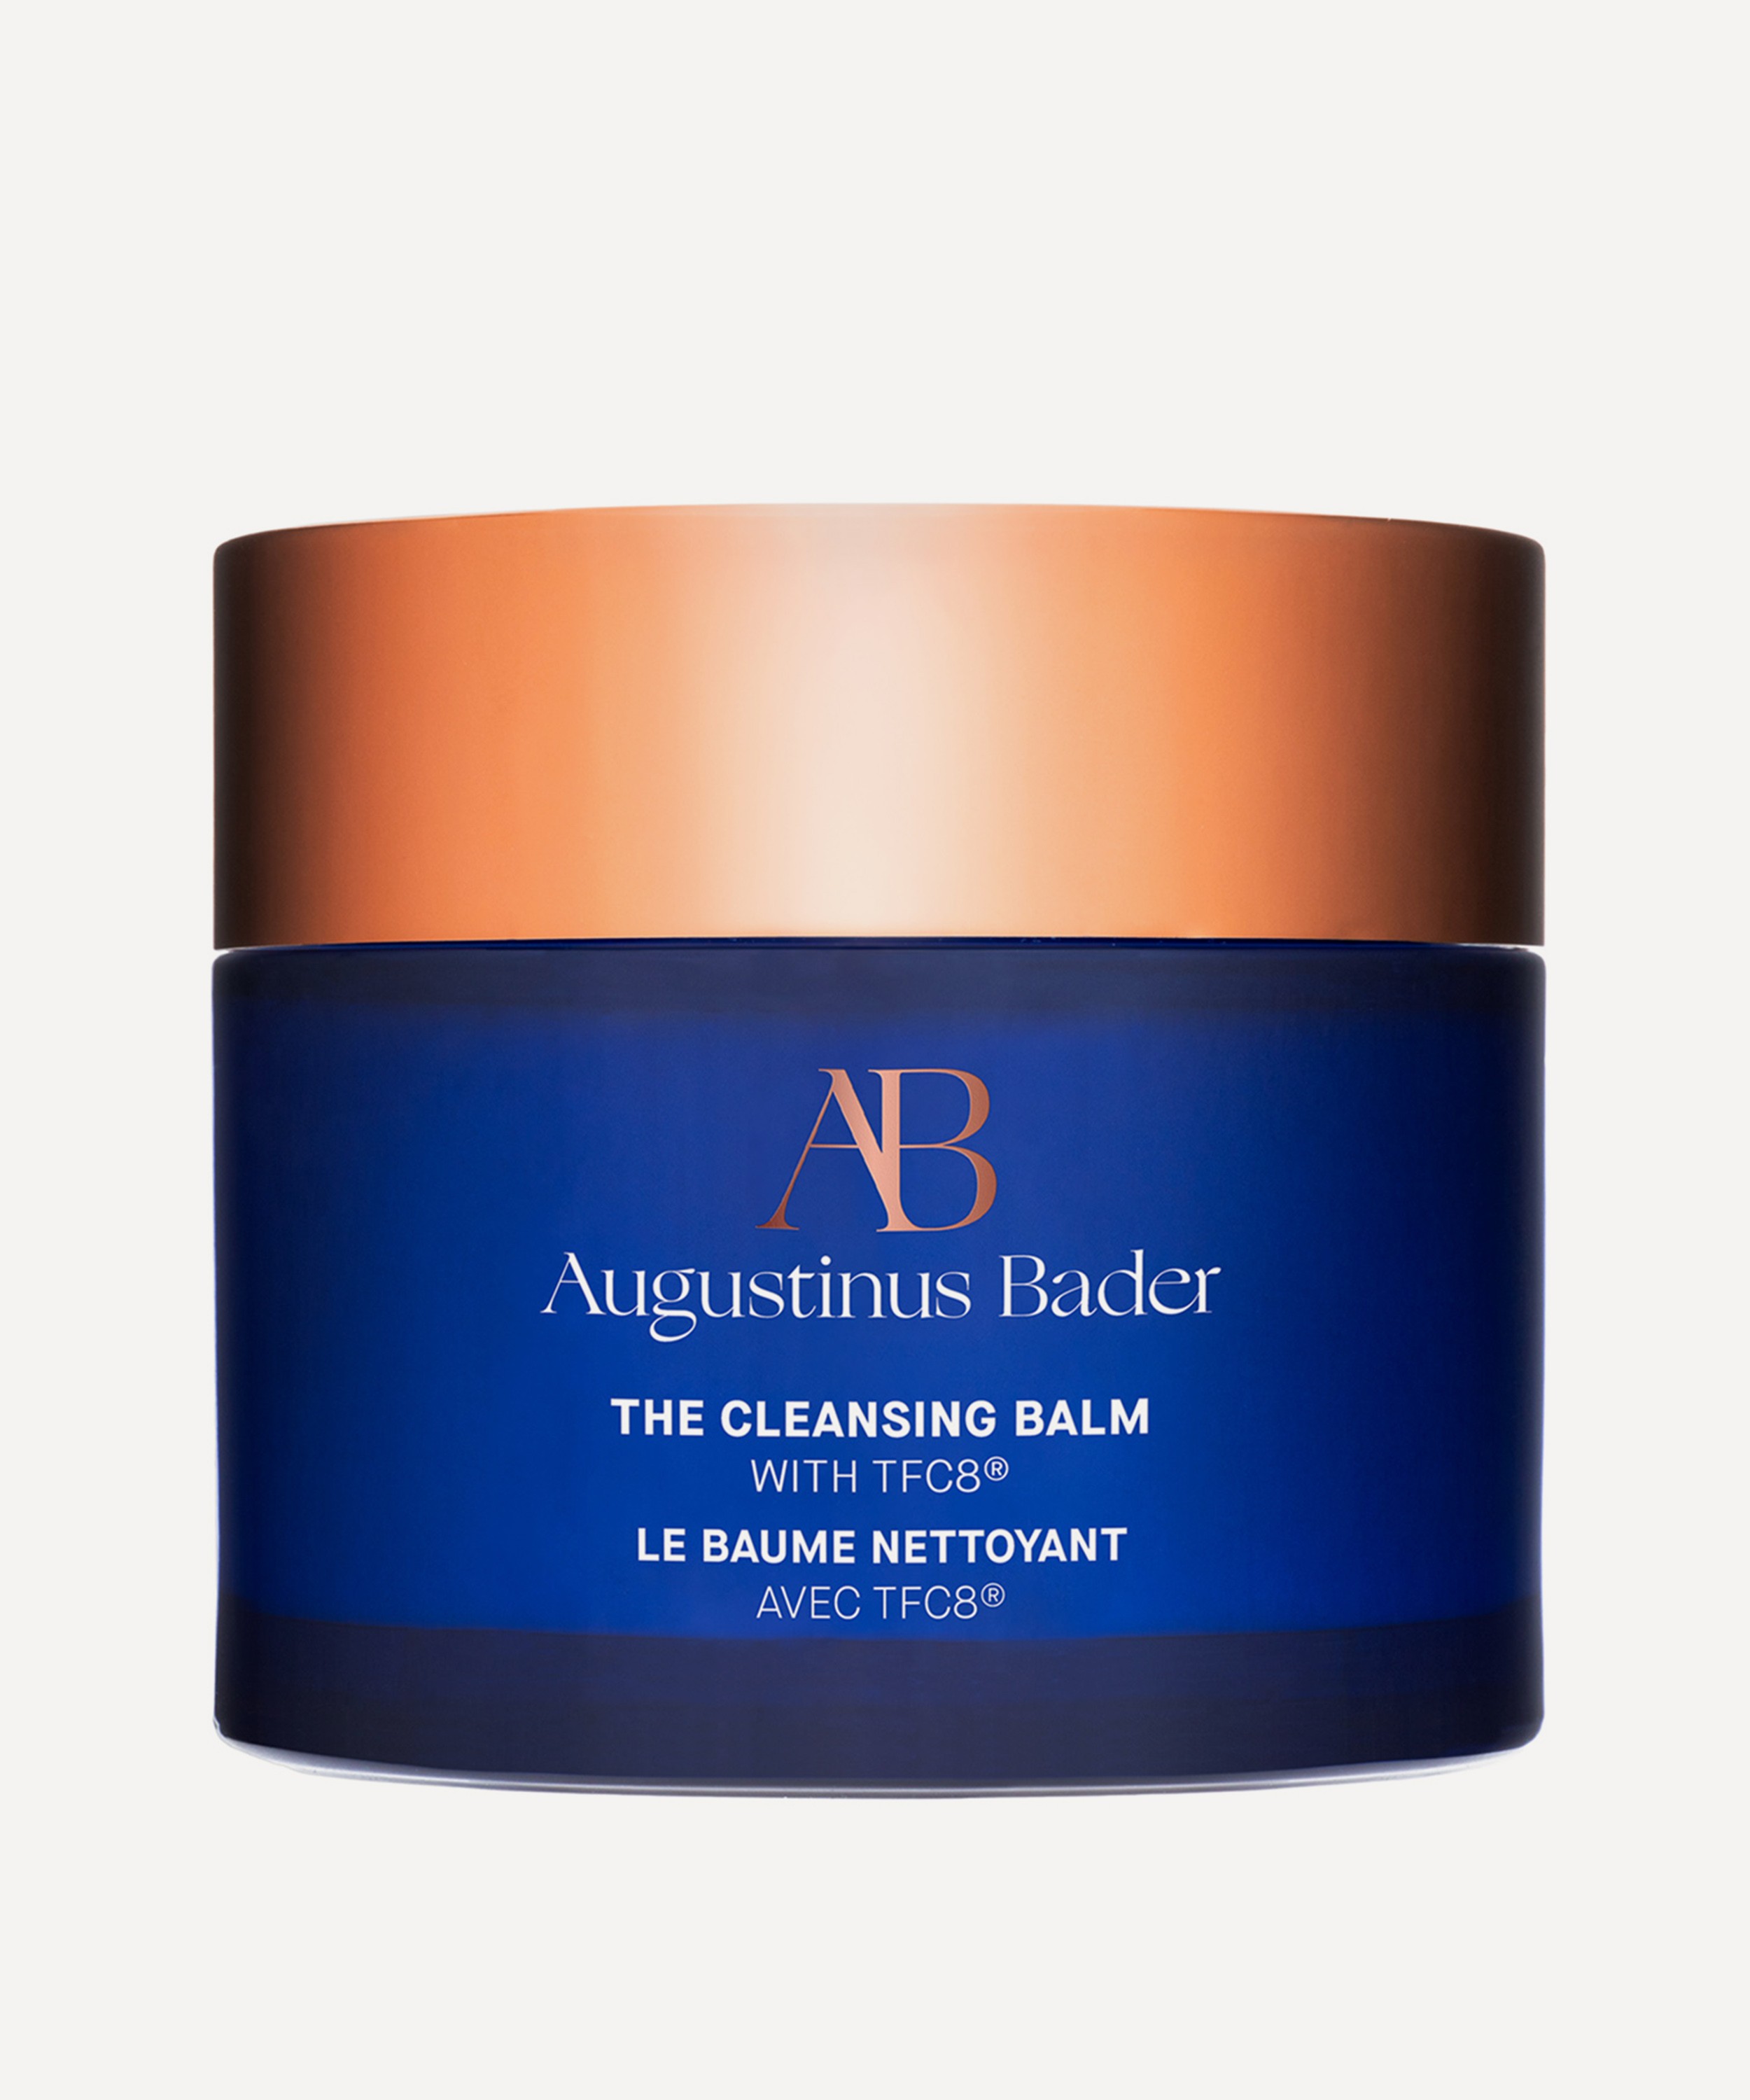 Augustinus Bader - The Cleansing Balm 90g image number 0